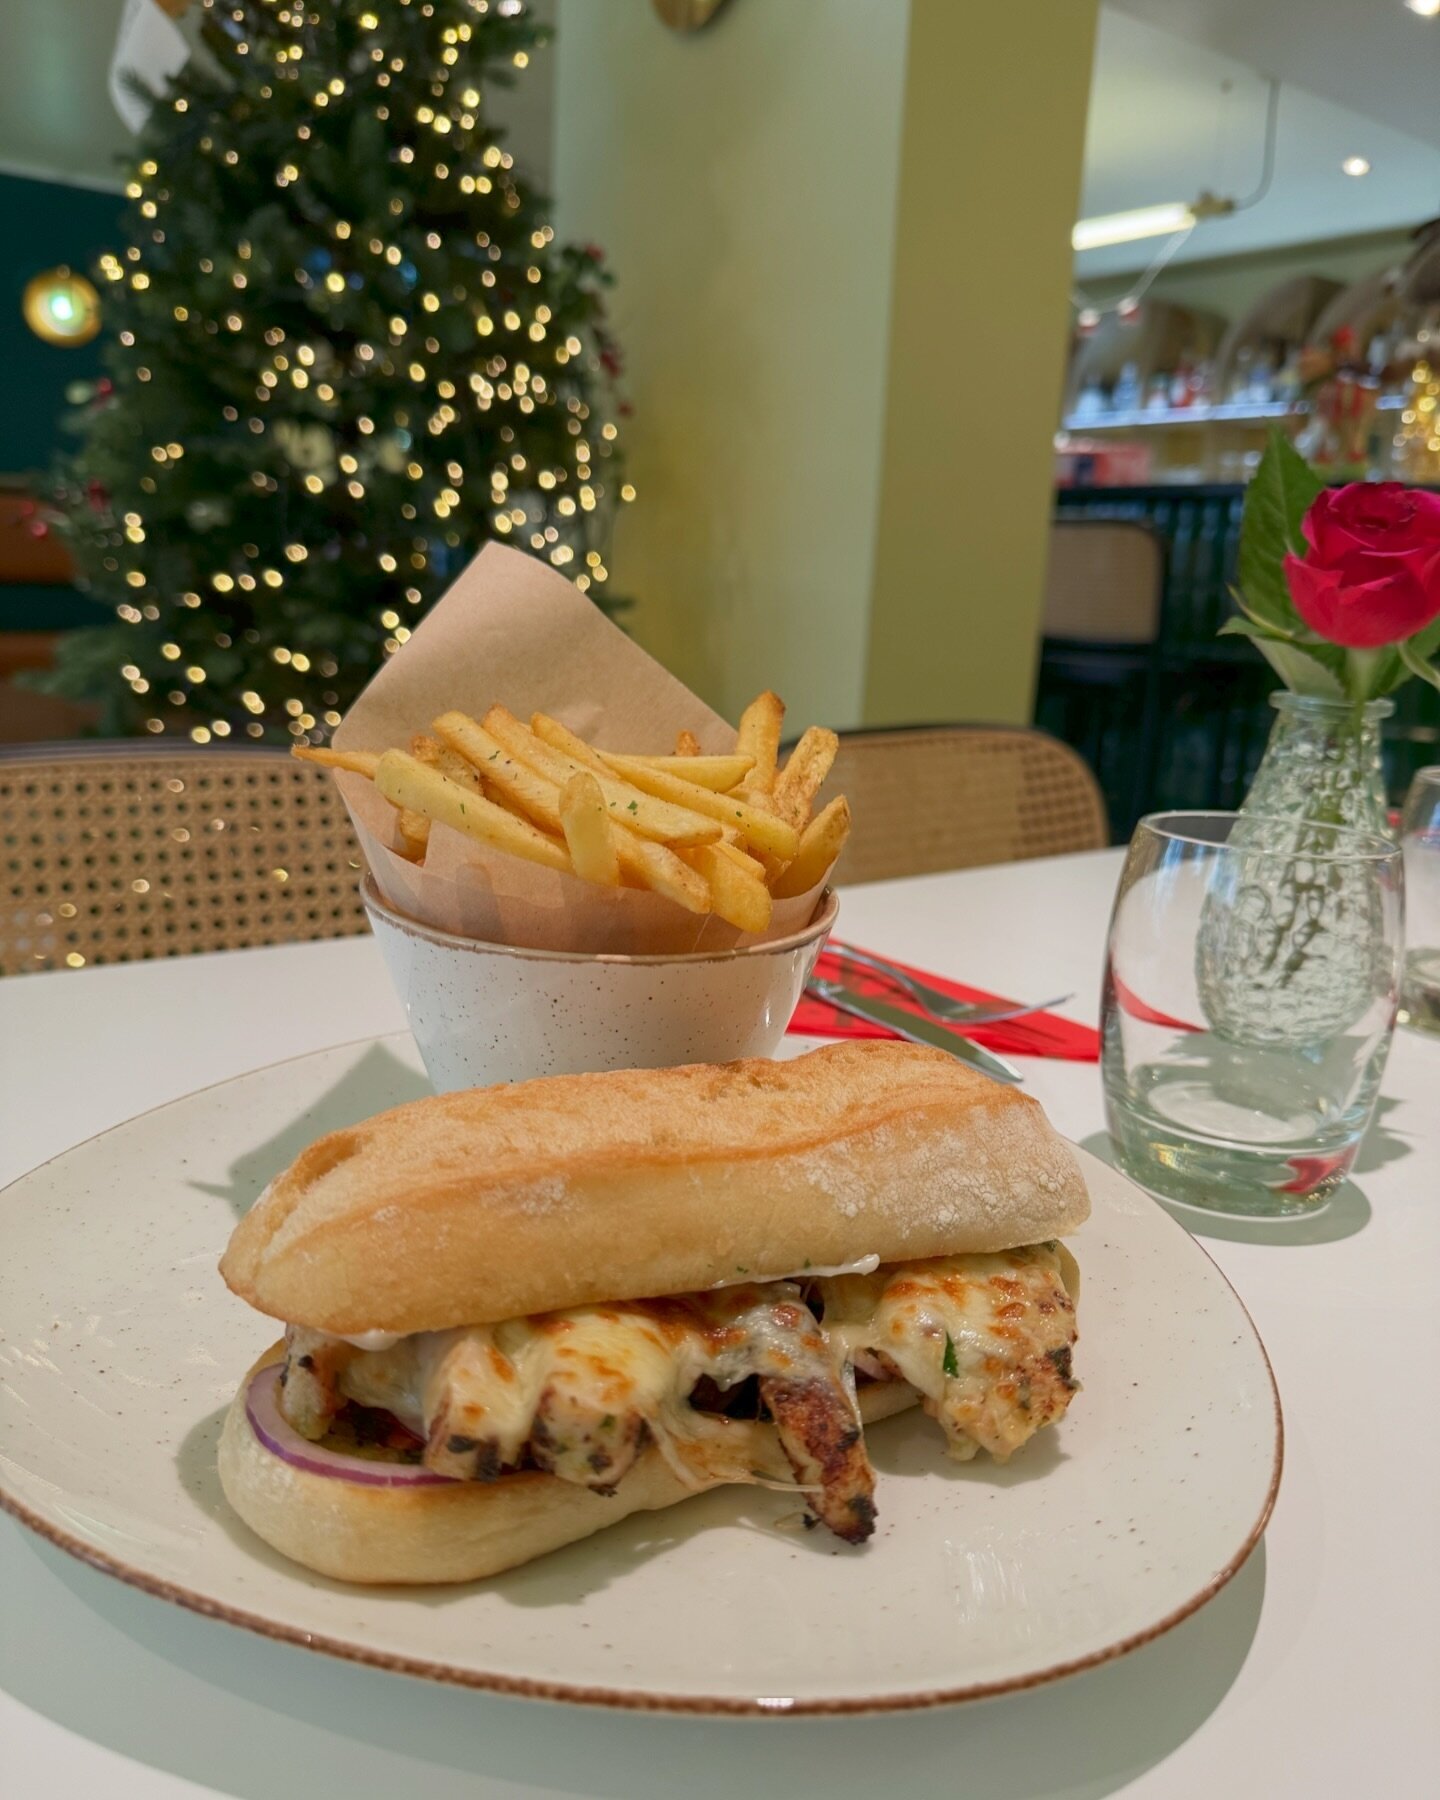 Our favourite pesto chicken ciabatta - house made pesto, house made garlic mayo, grilled free range chicken breast, red onion, sun dried tomatoes and mozzarella cheese 💕